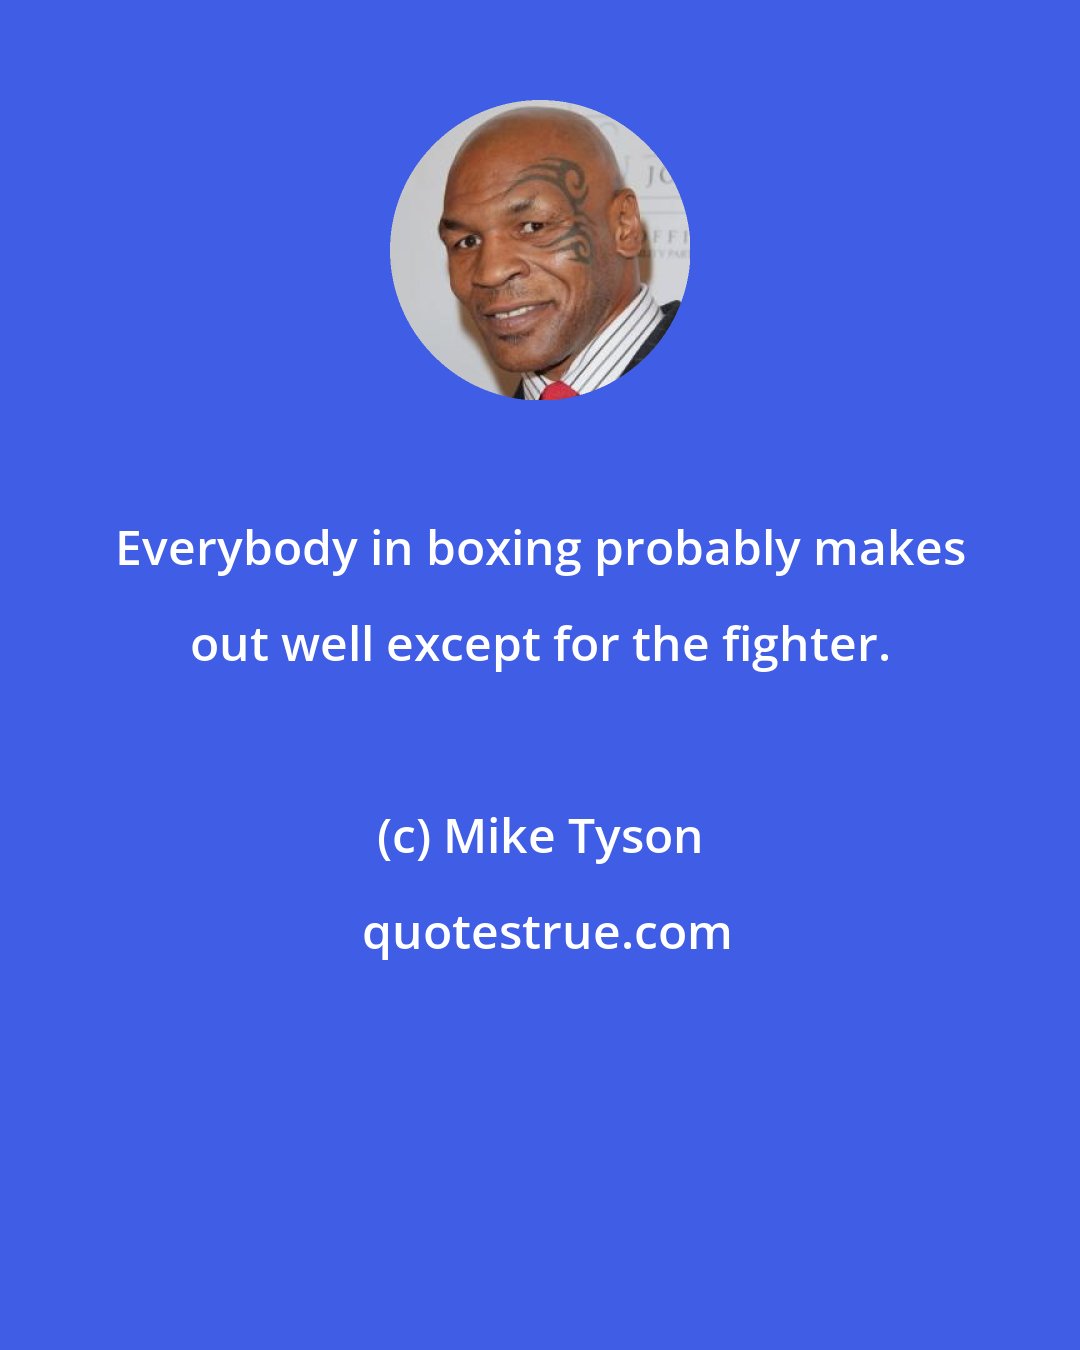 Mike Tyson: Everybody in boxing probably makes out well except for the fighter.